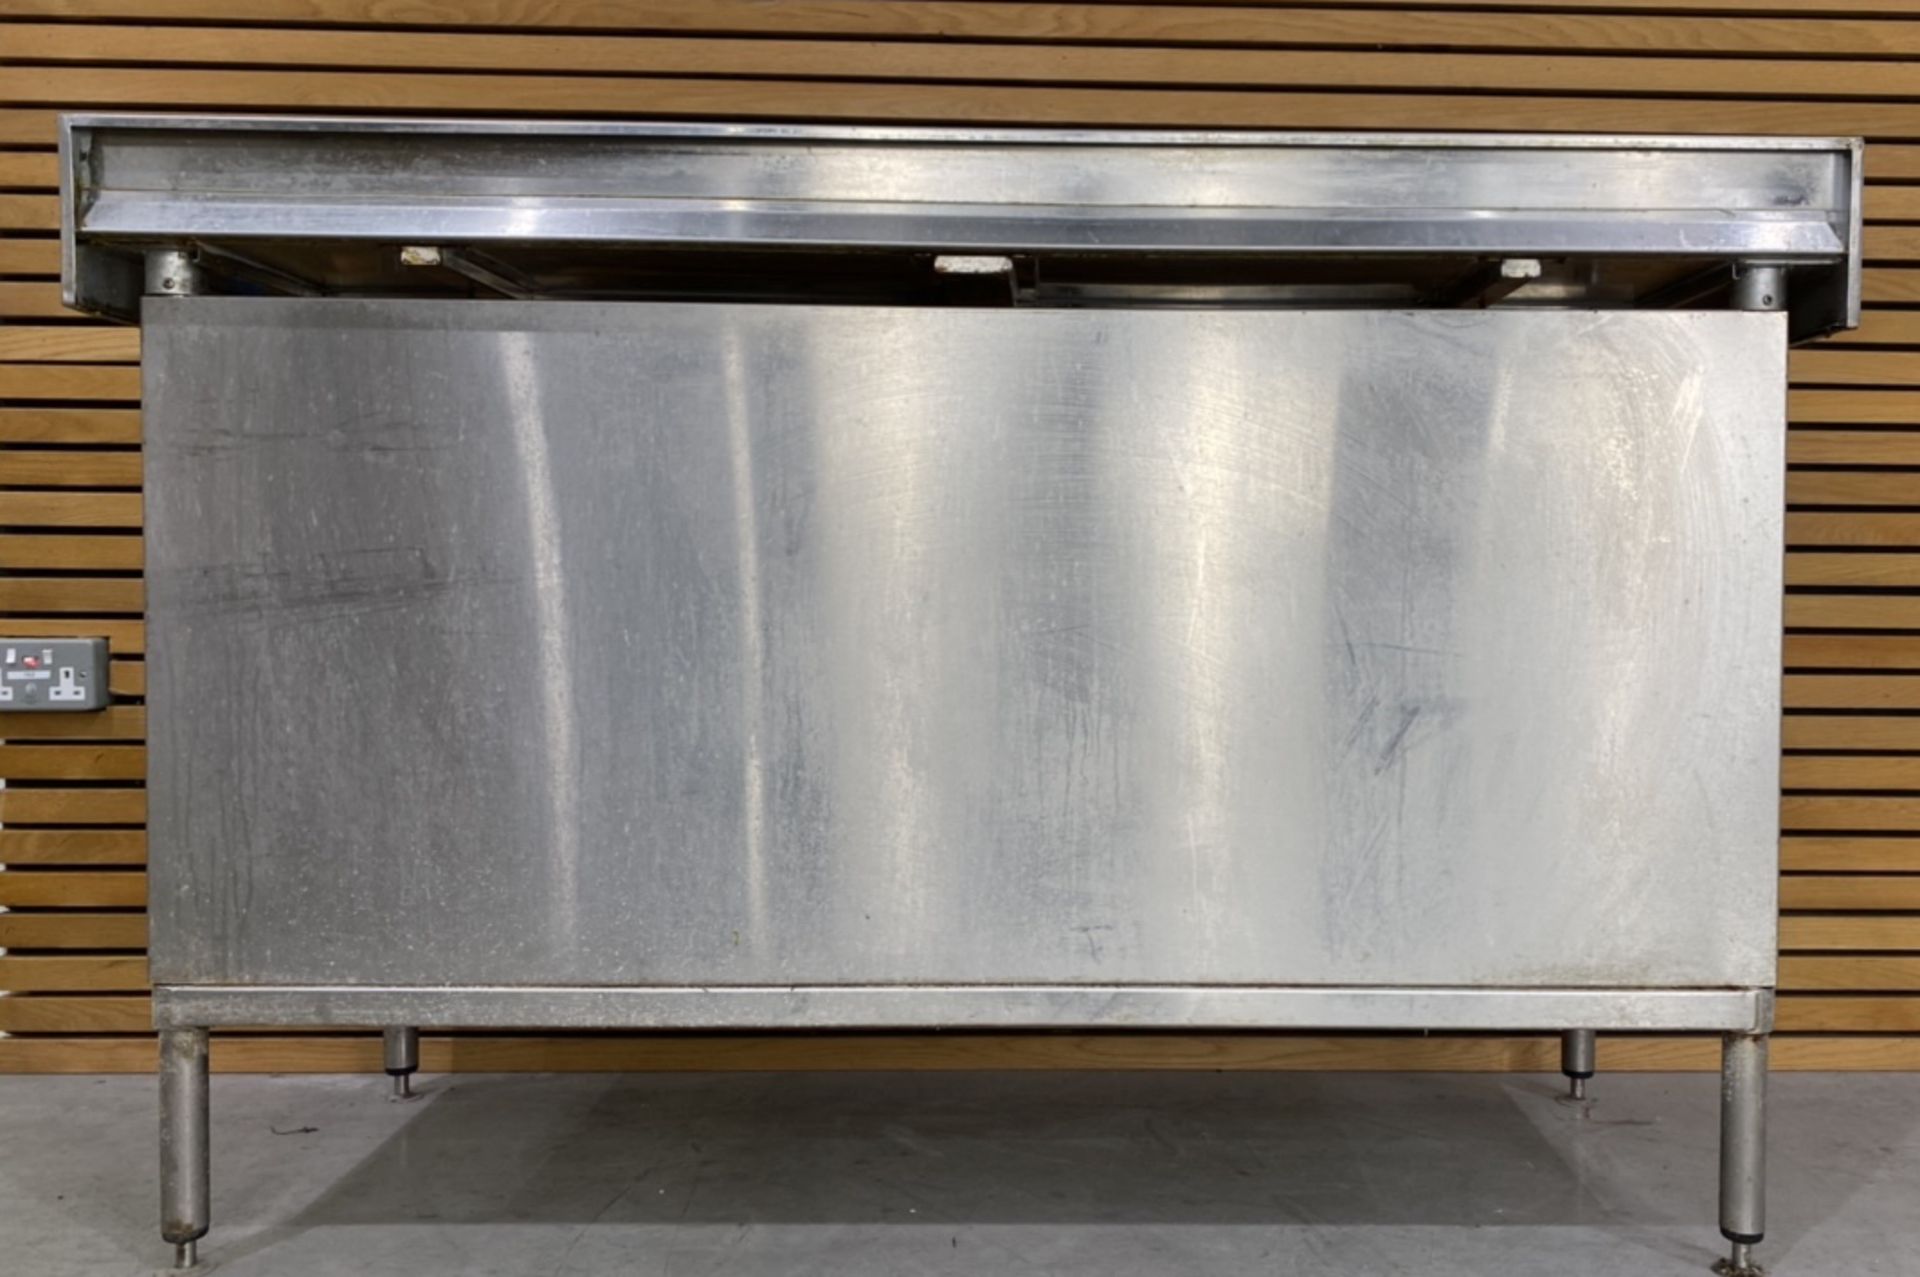 Simply Stainless Steel Preparation Table - Image 2 of 3